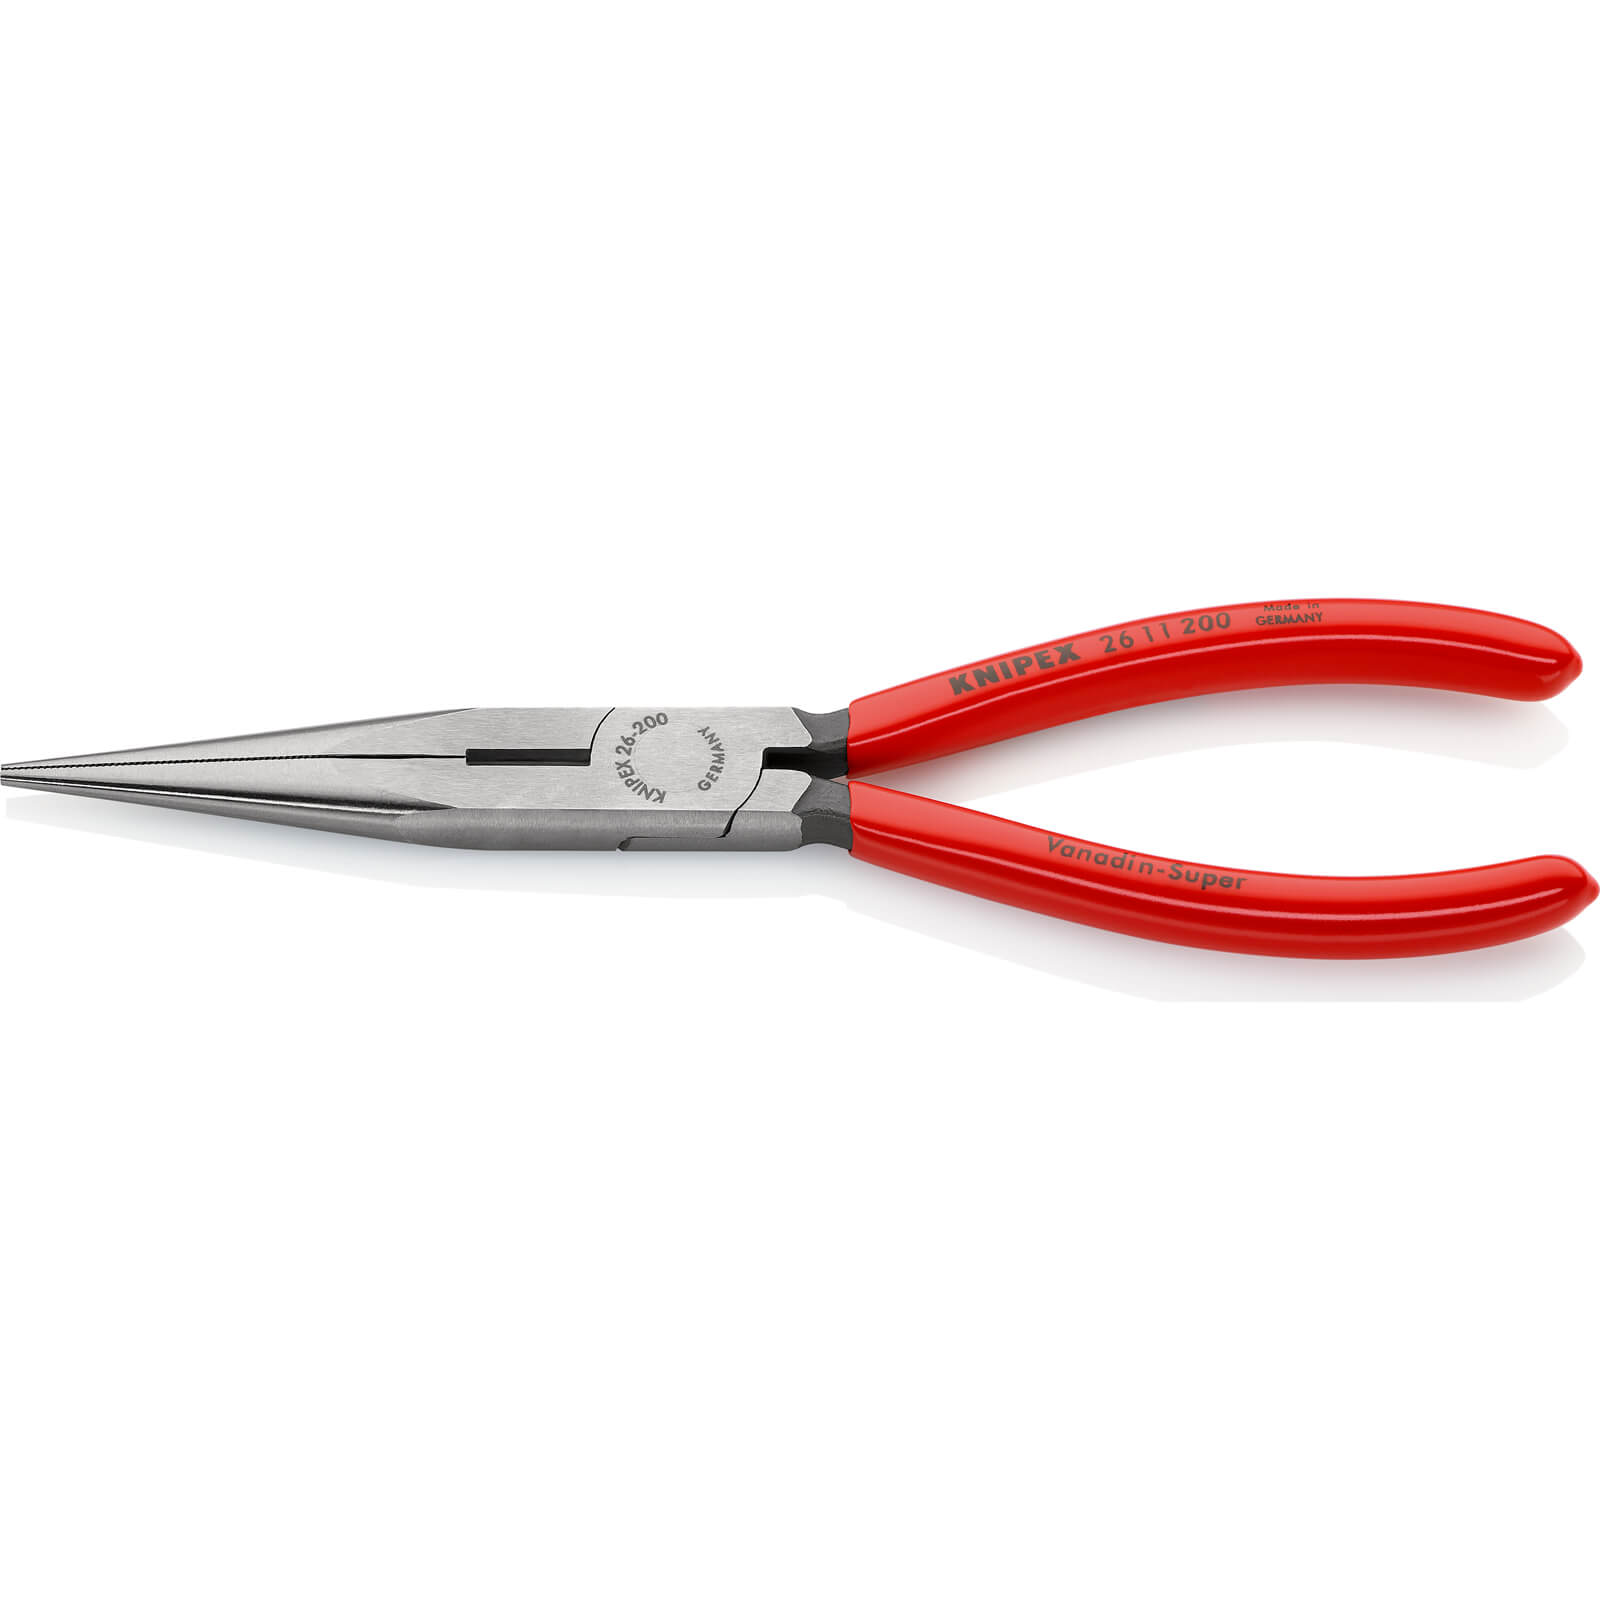 Photo of Knipex 26 11 Long Nose Side Cutting Pliers 200mm